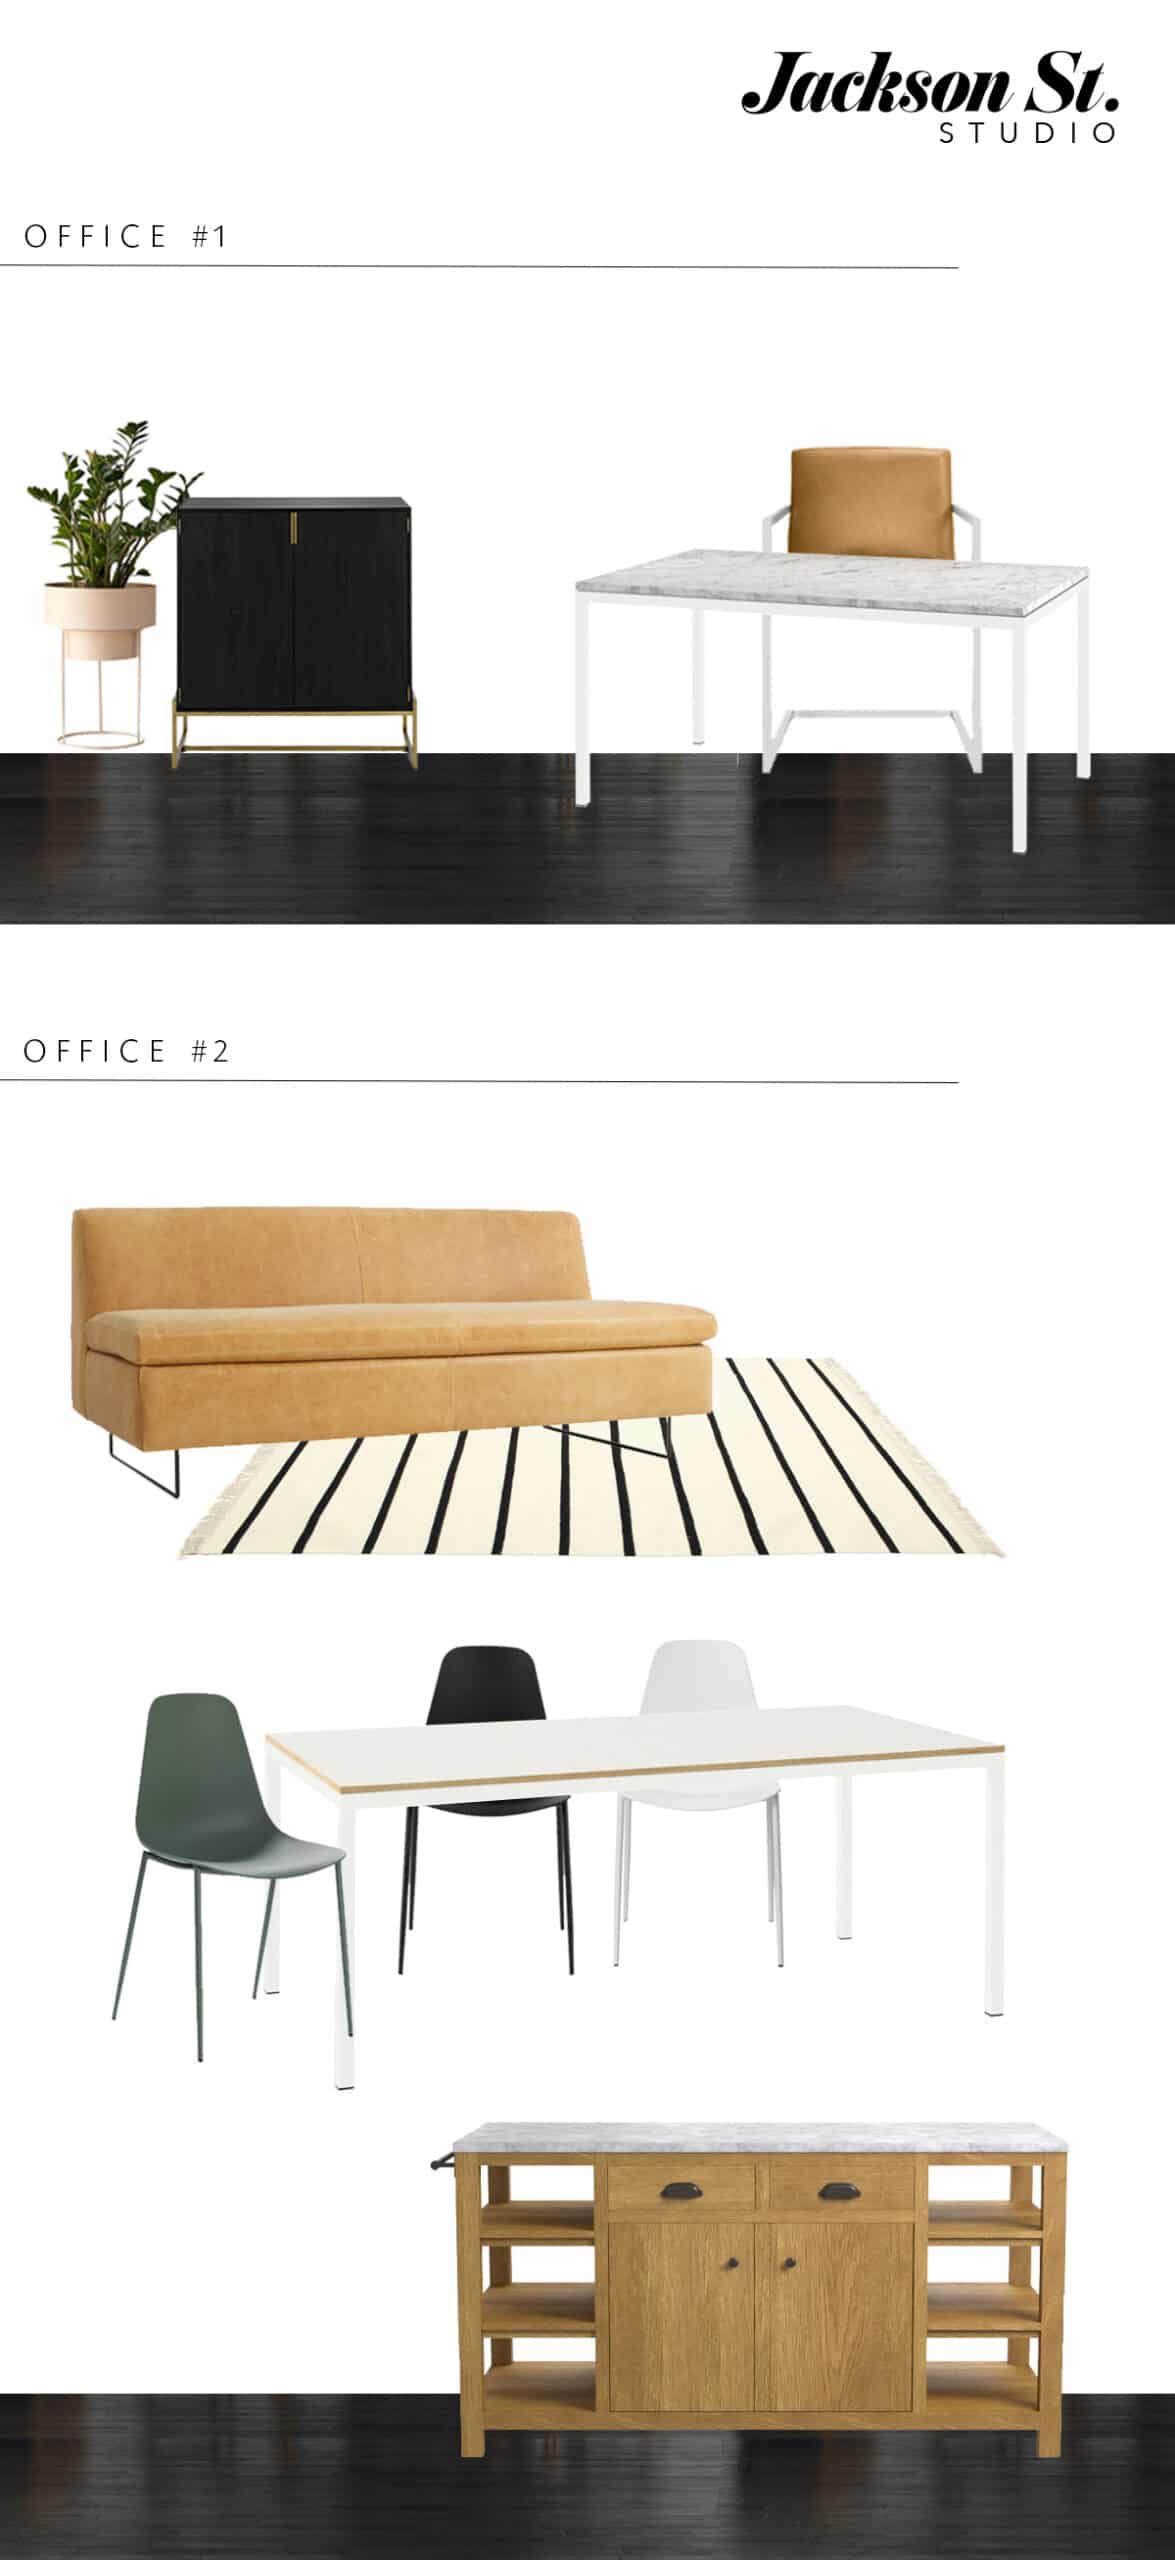 plans for our new office furniture | coco kelley